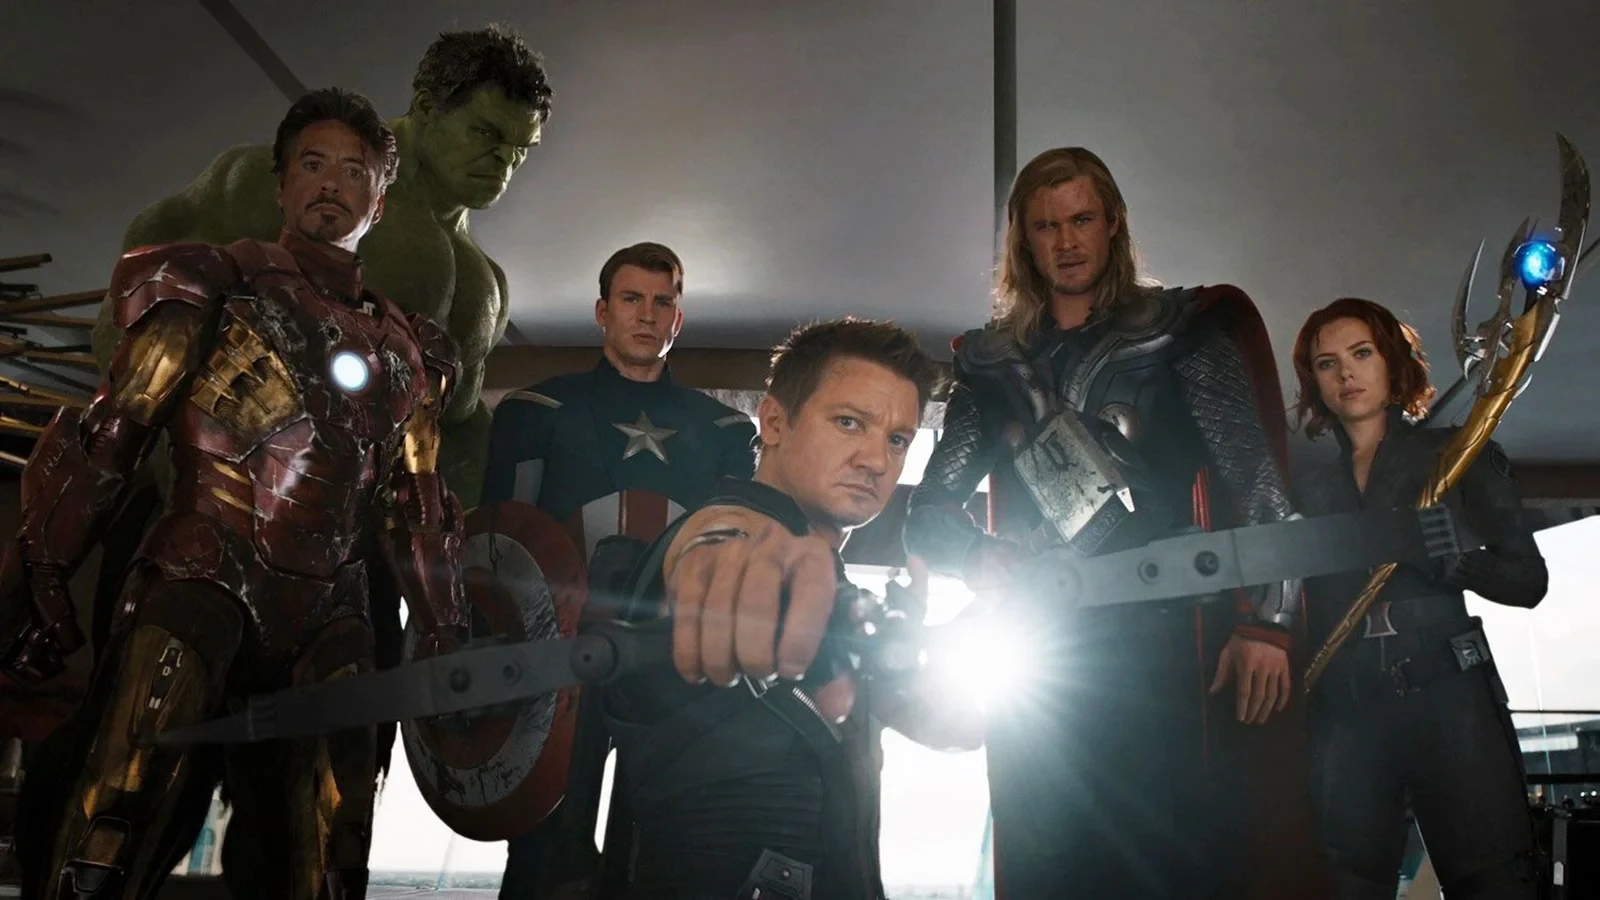 Chris Hemsworth and his Marvel co-stars in a still from The Avengers | Marvel Studios